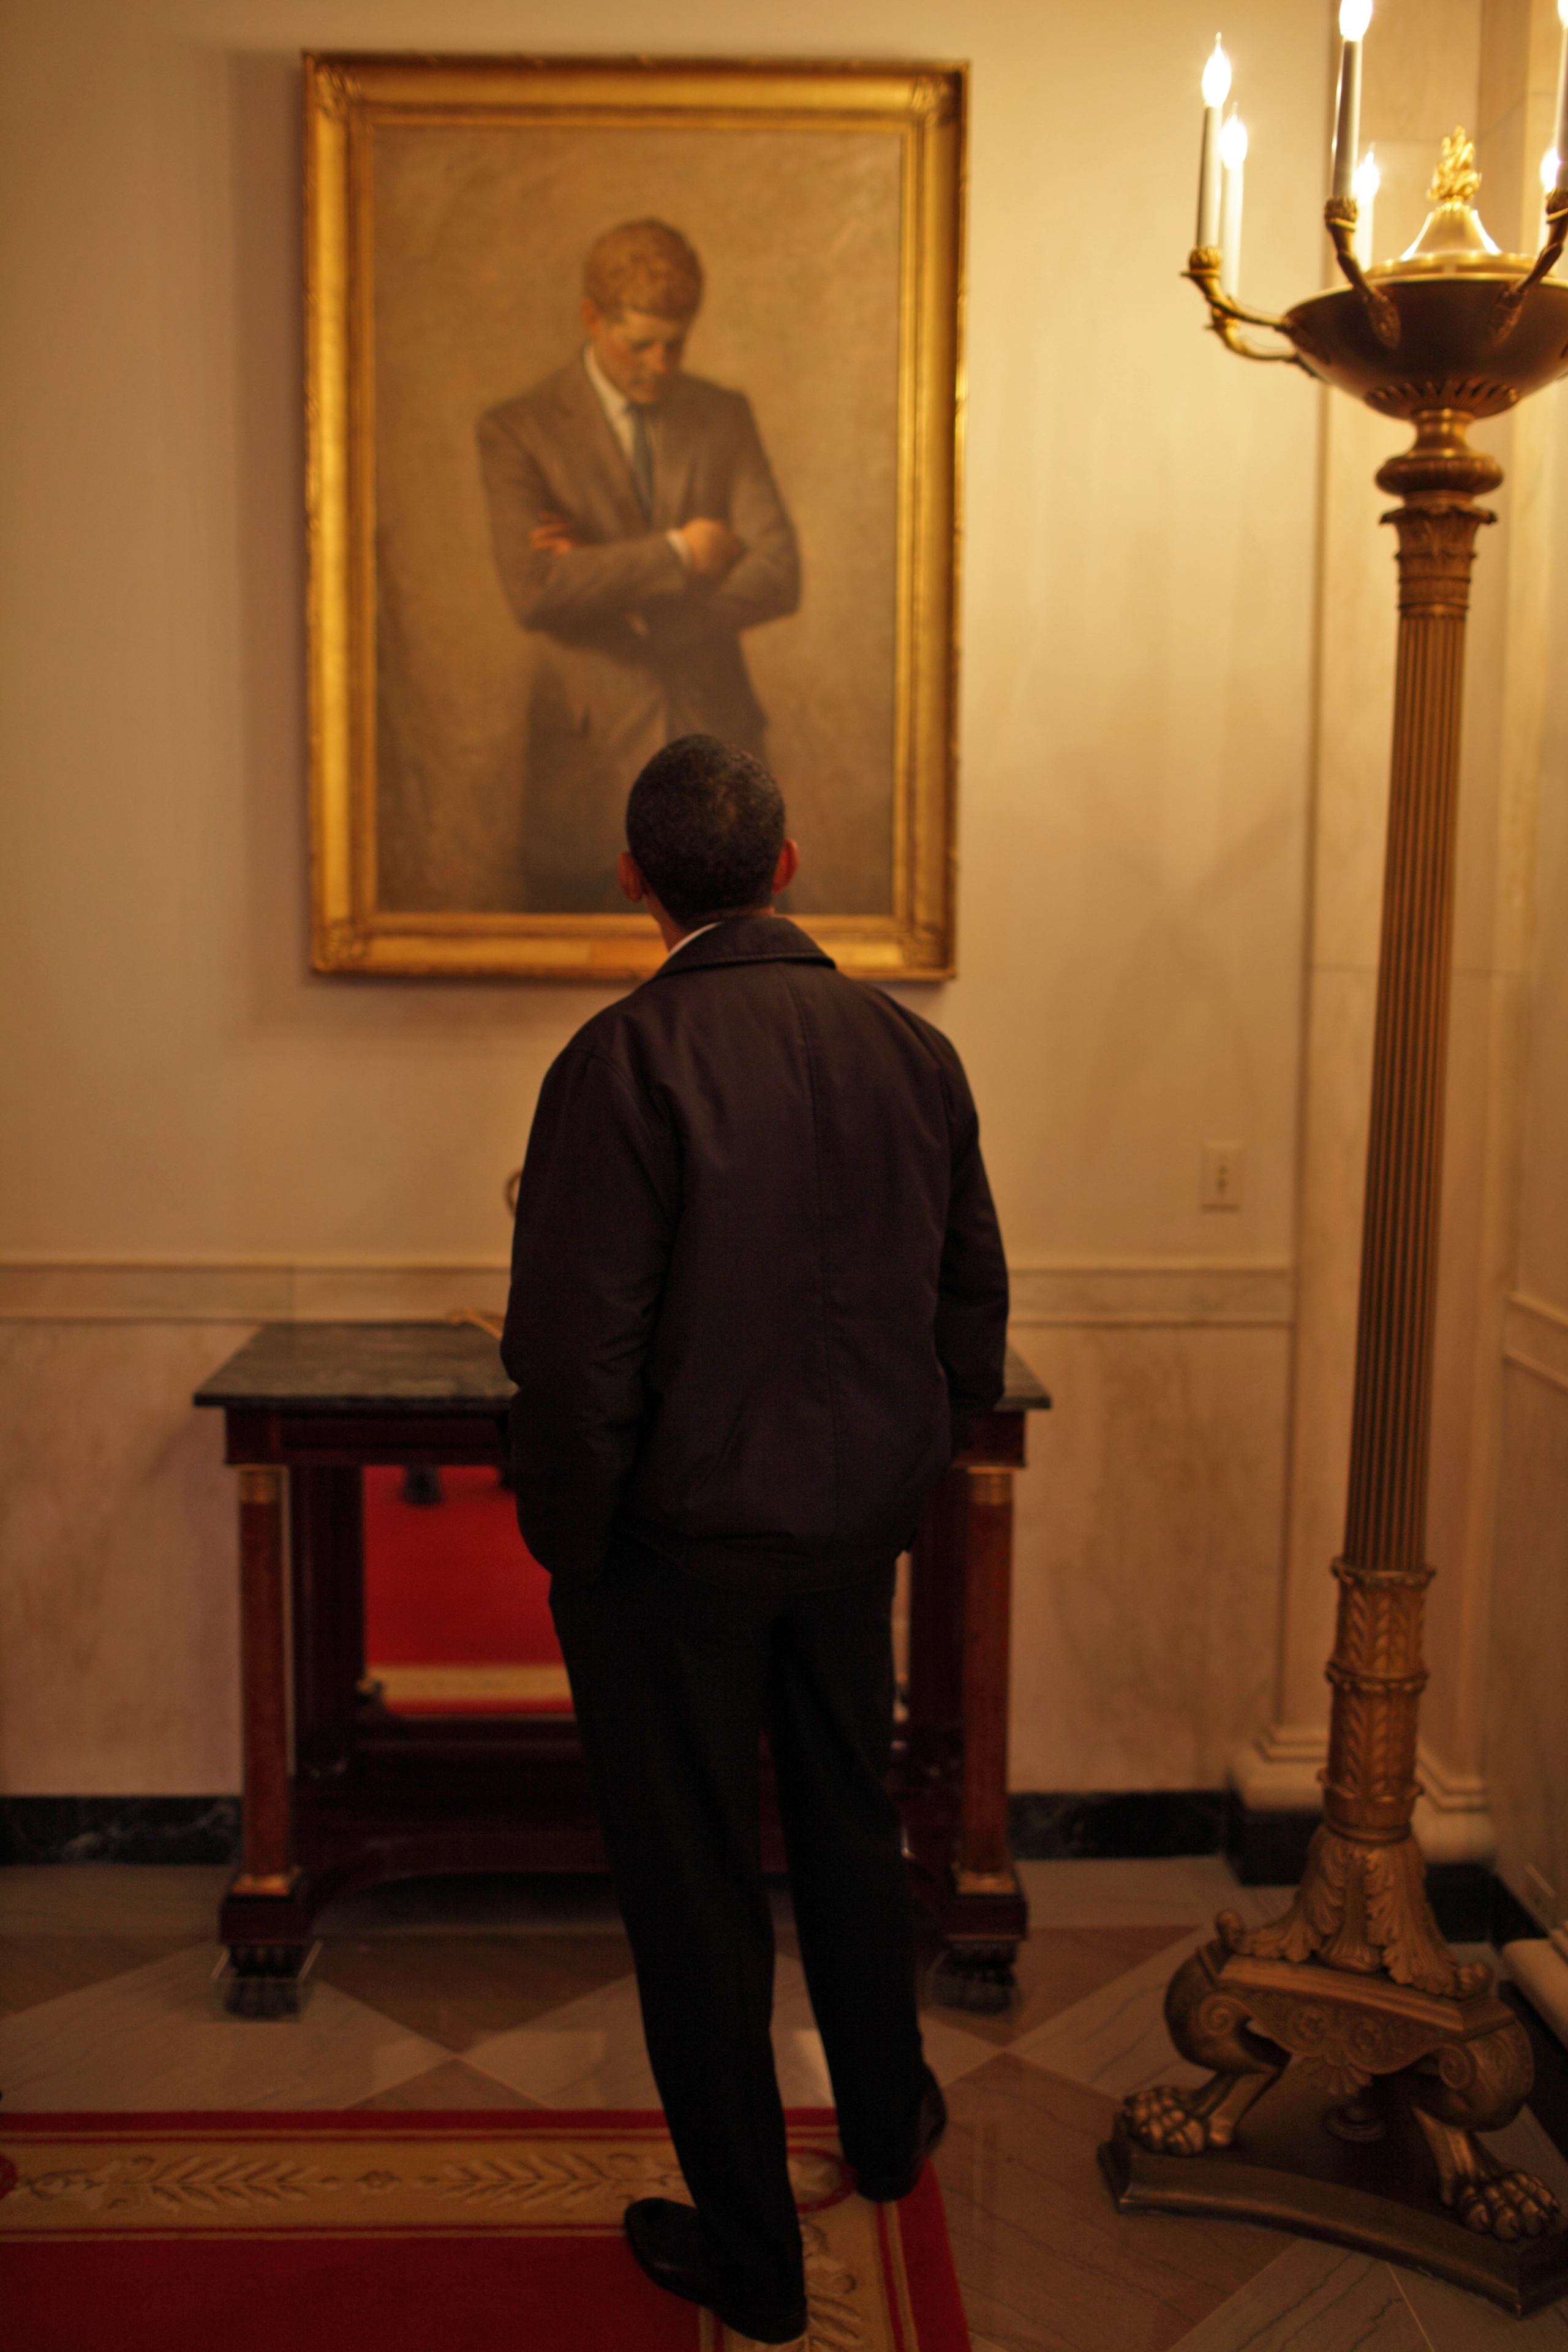 President Barack Obama checks out a portrait of President John Kennedy during an historical tour of the White House residence and grounds in Washington, DC., on Jan. 21, 2009.